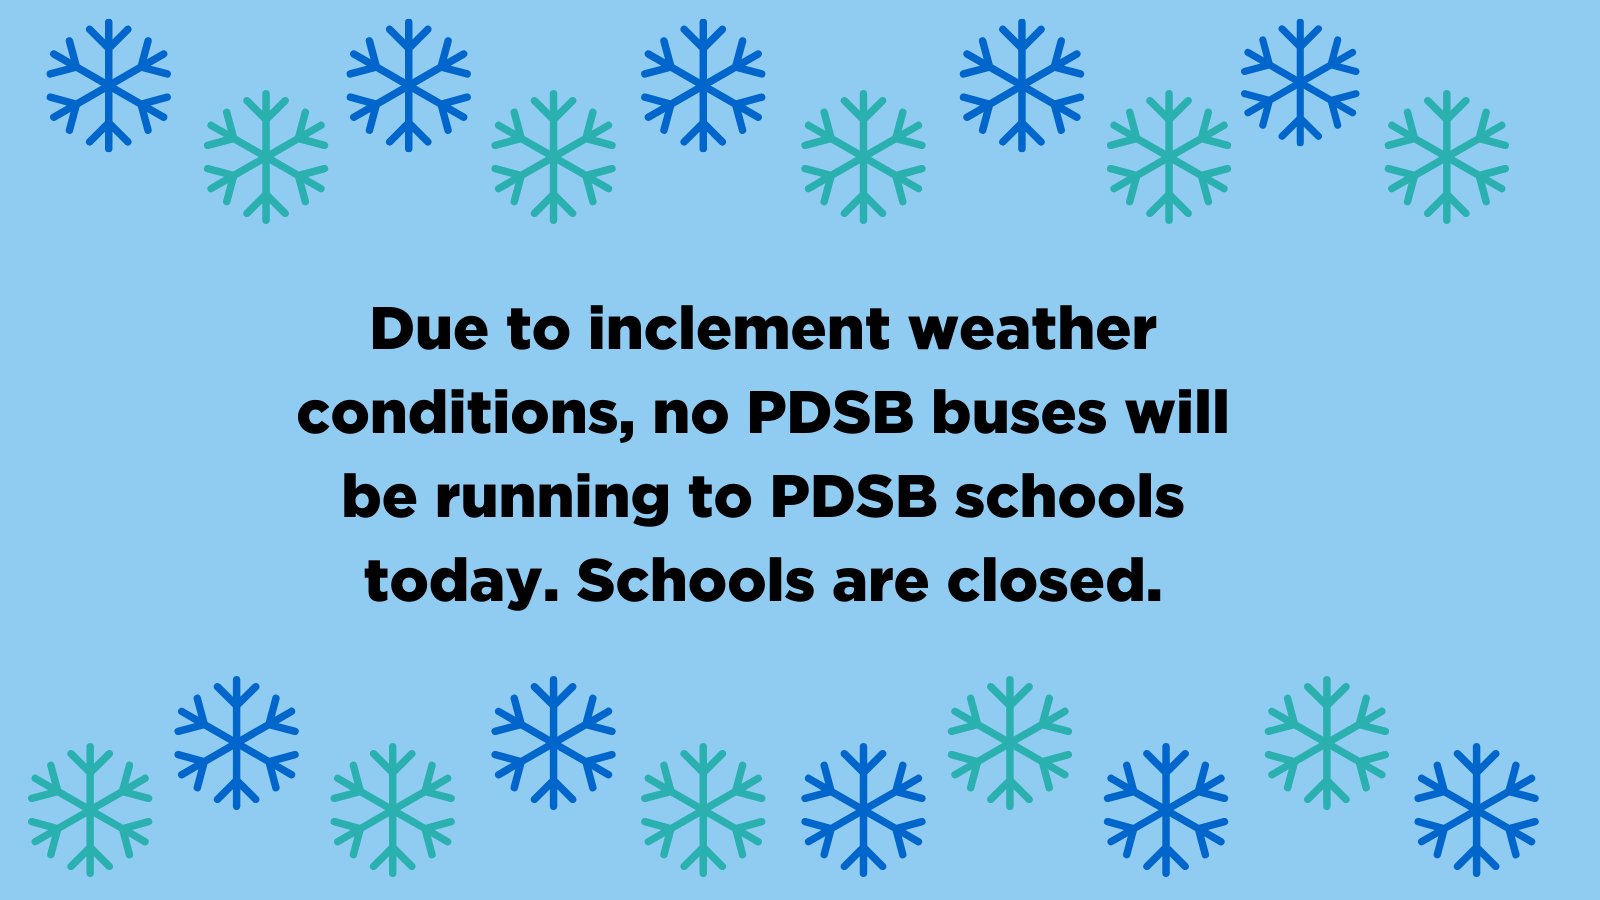 Peel District School Board on Twitter "Due to inclement weather